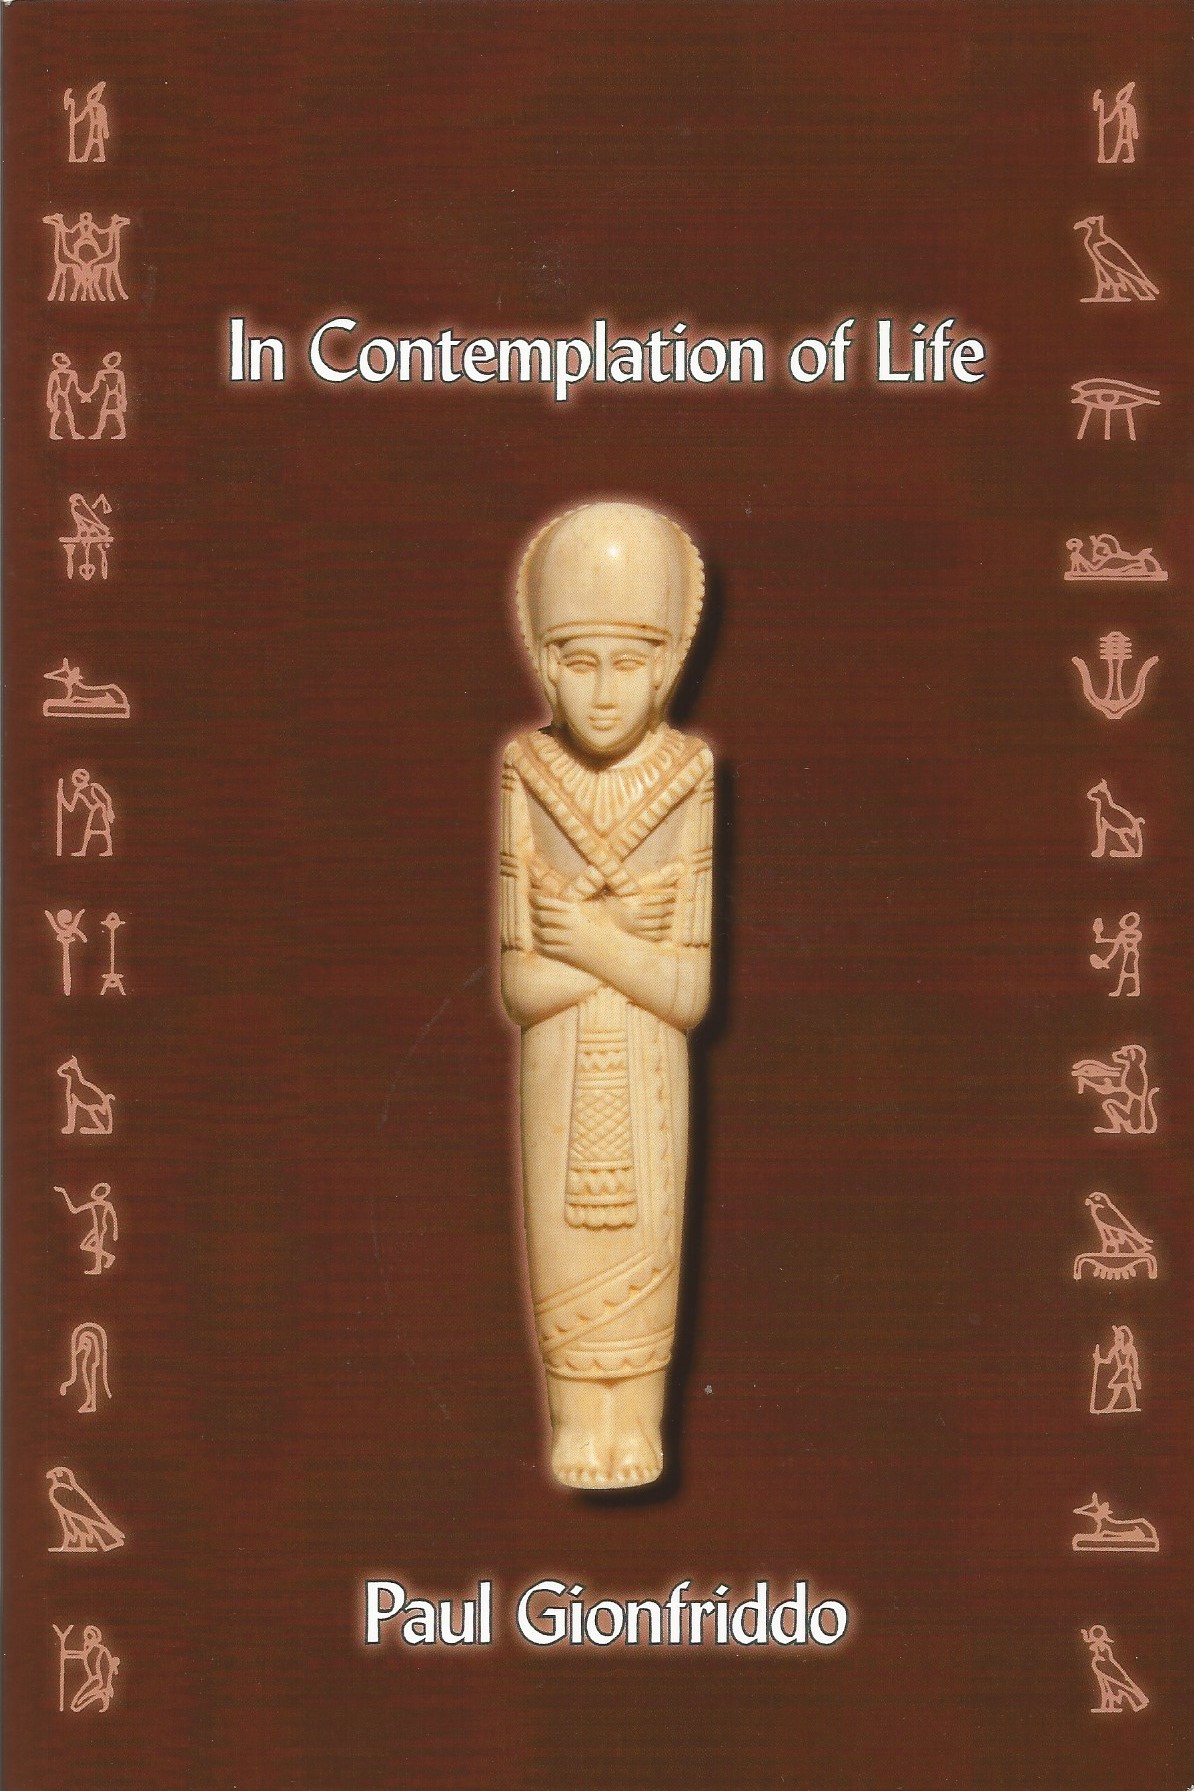 In Contemplation of Life / Paul Gionfriddo